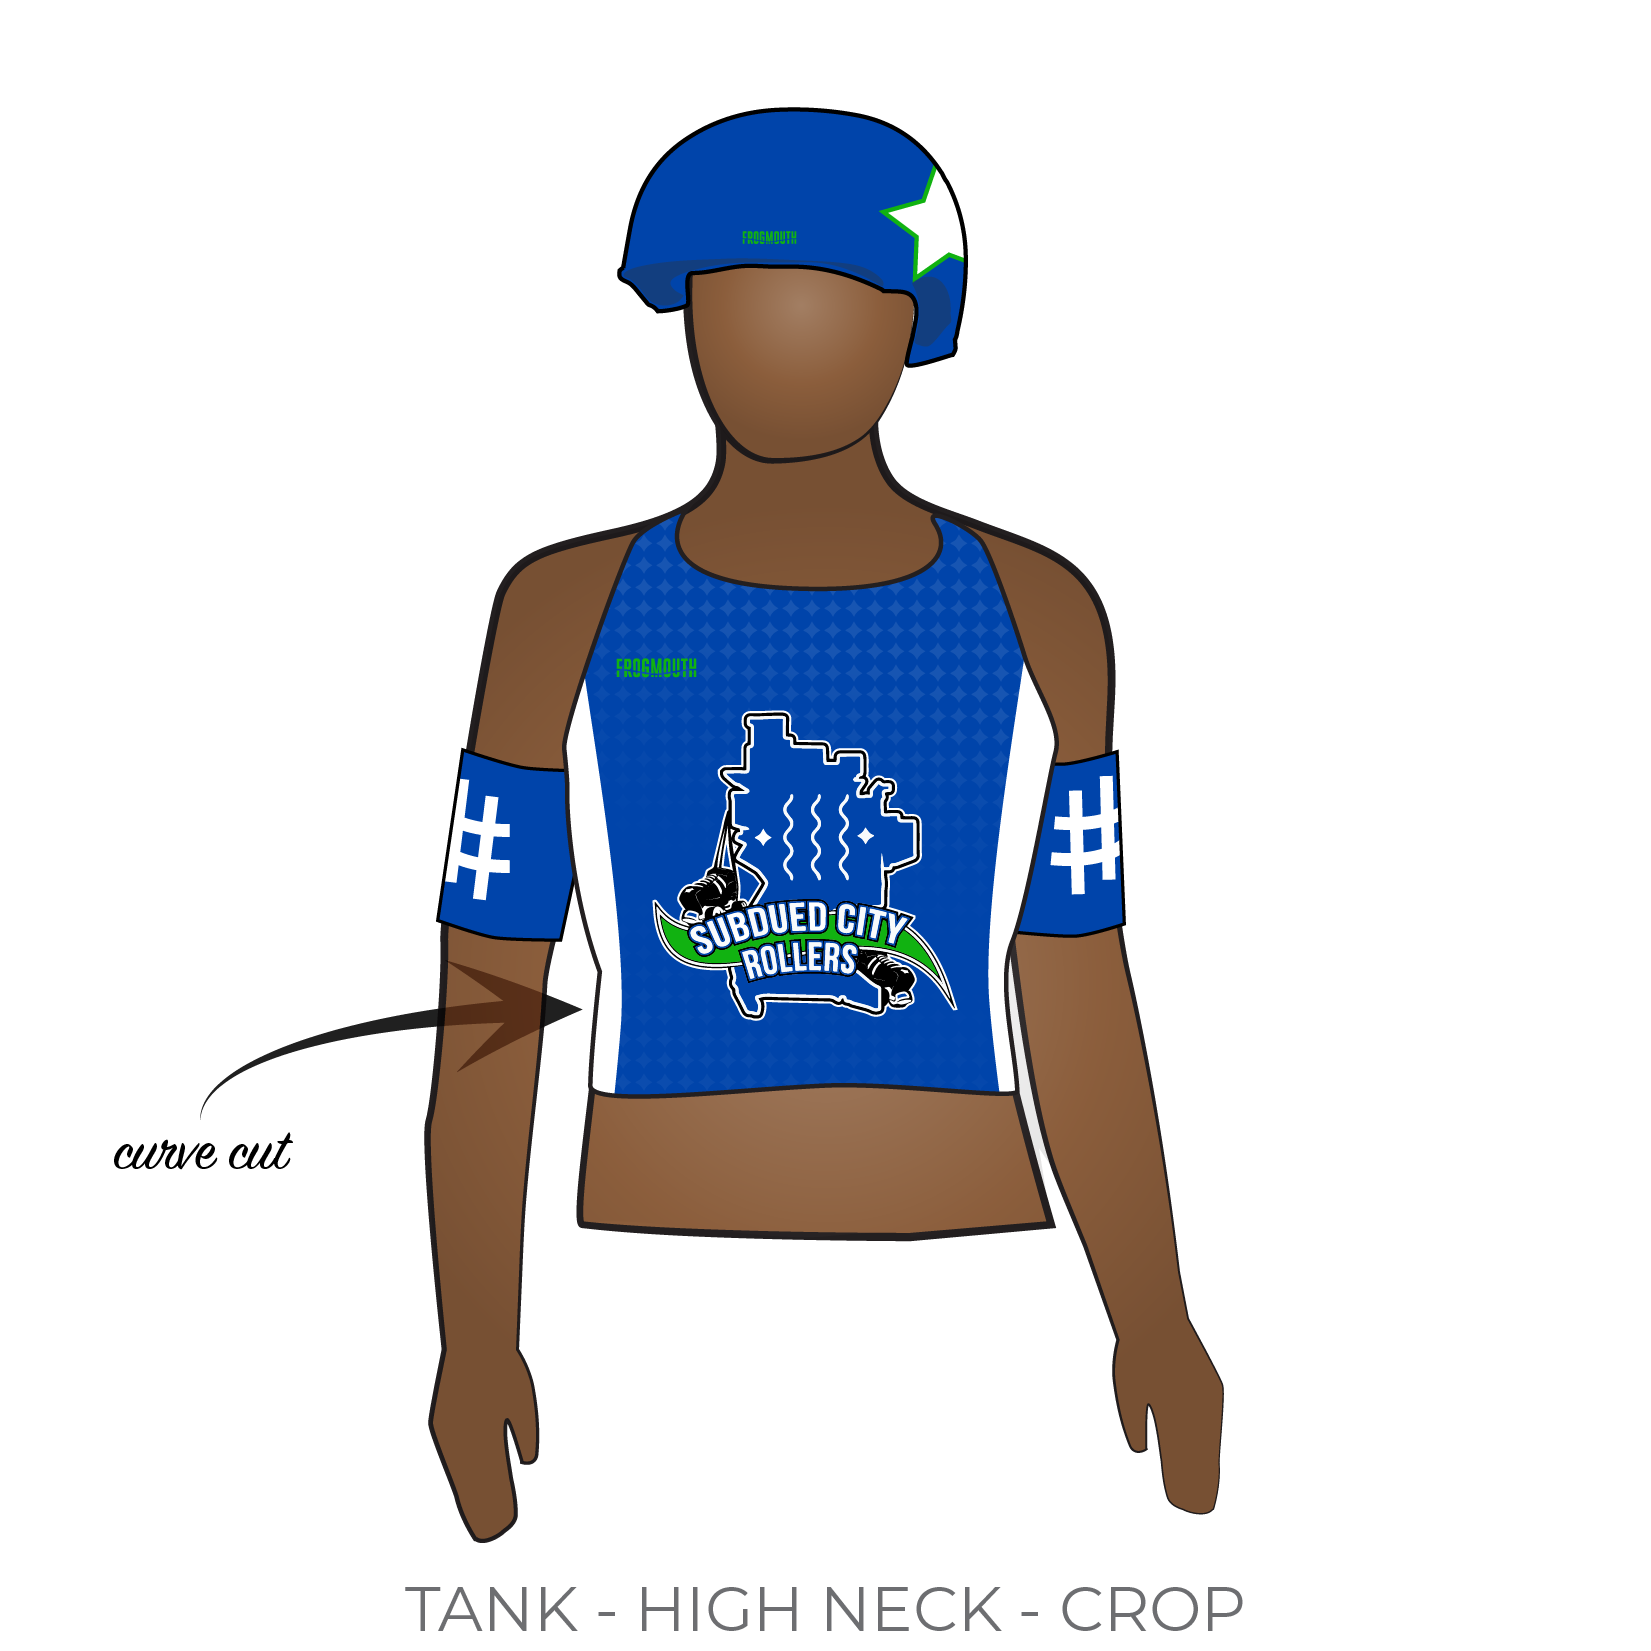 Subdued City Rollers: 2019 Uniform Jersey (Blue) – Frogmouth